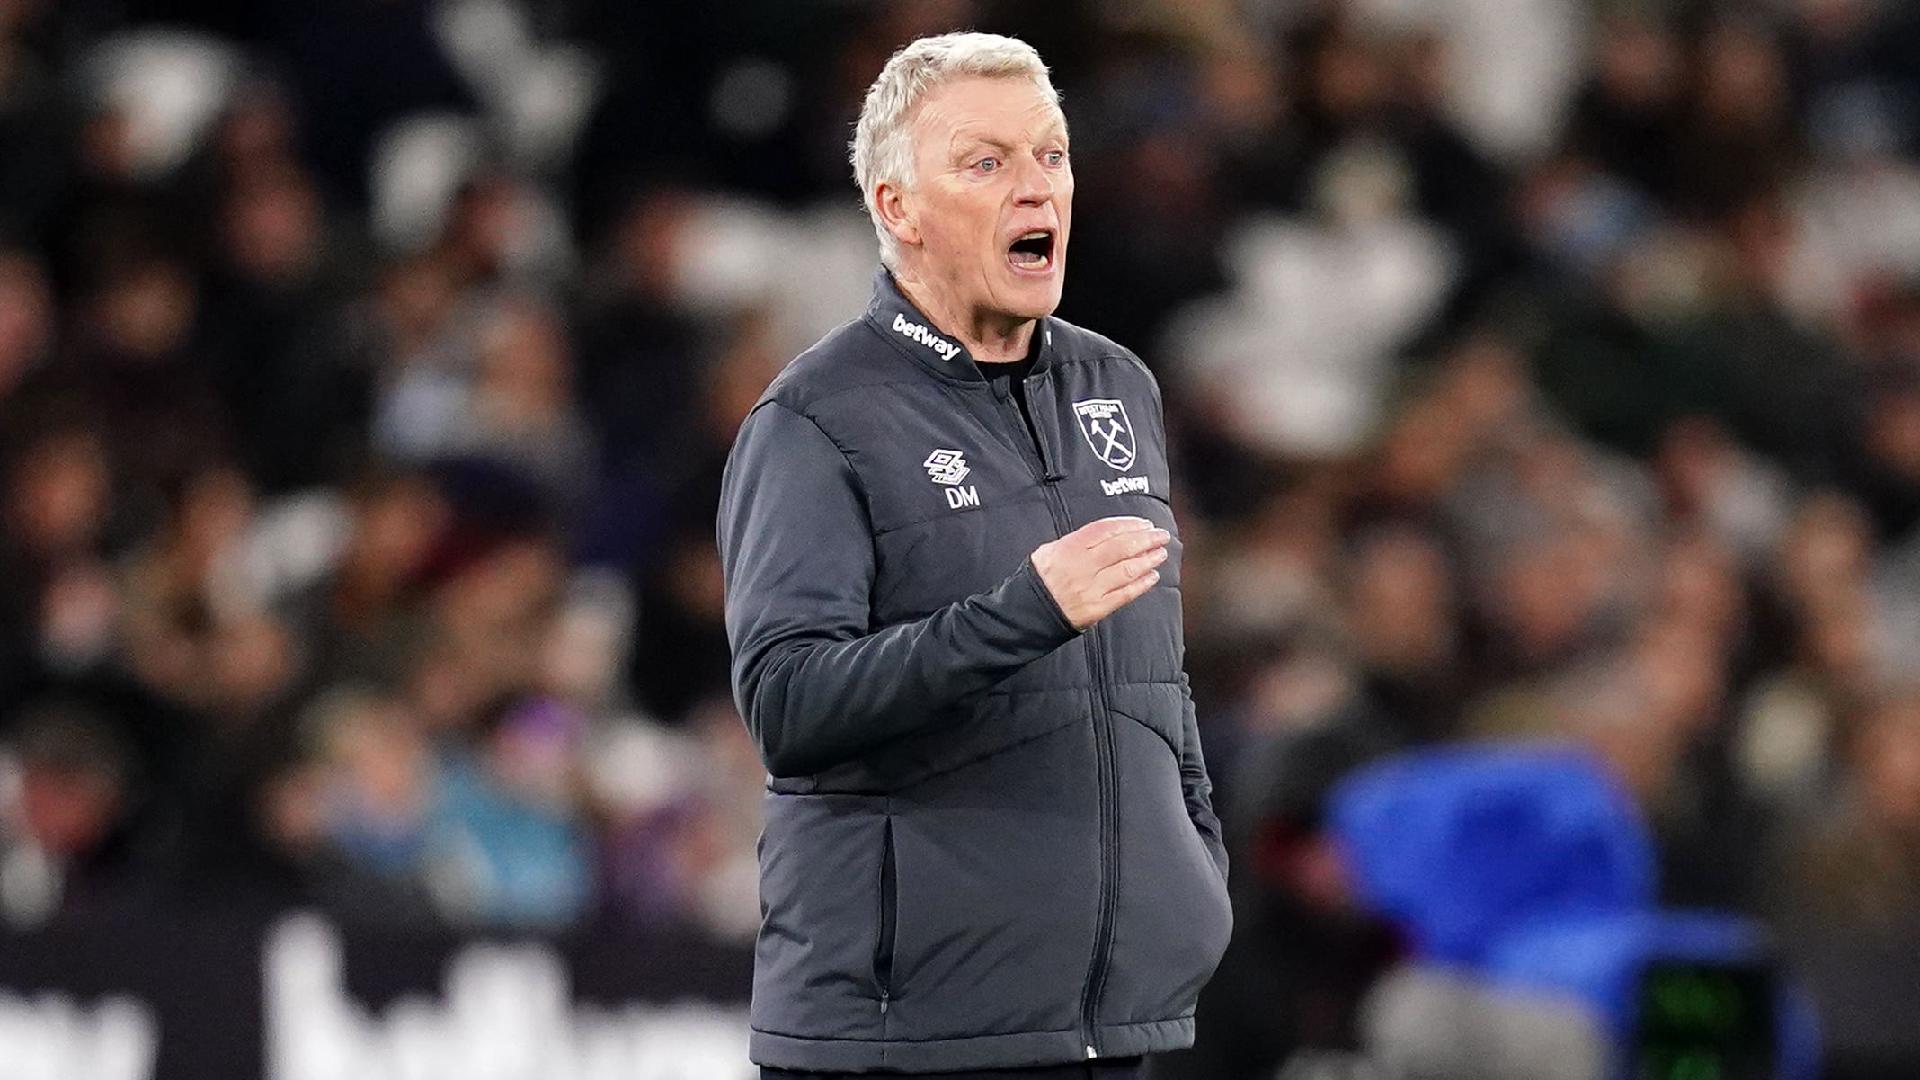 David Moyes hopes West Ham over ‘difficult period’ after long-awaited win